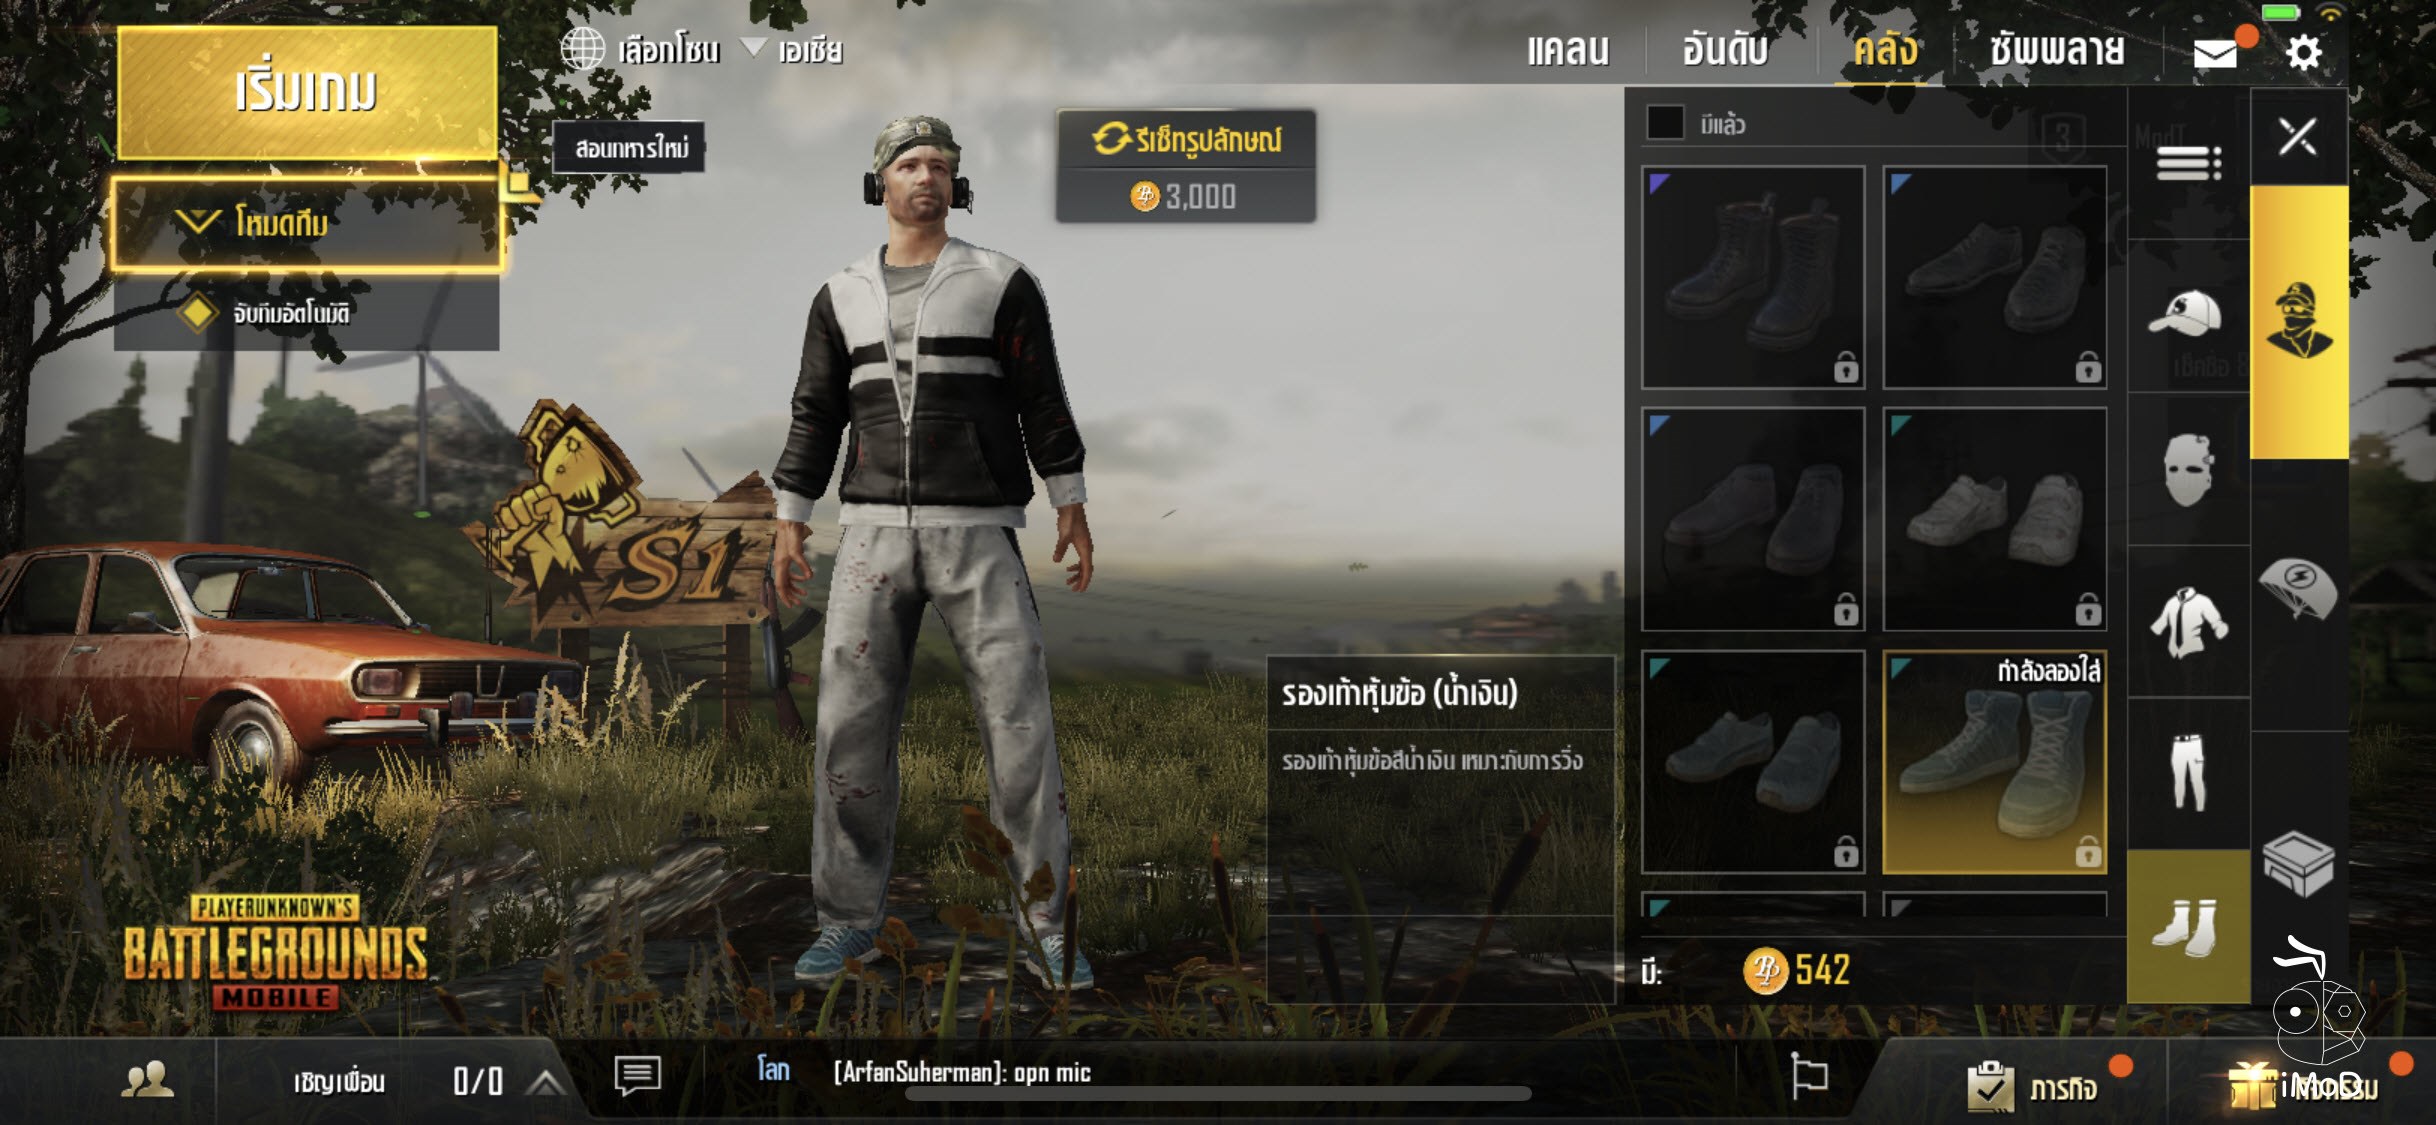 Pubg Mobile Hack How To Get Unlimited Gold Gold Diamonds - pubg mobile บน ios อ ปเ�